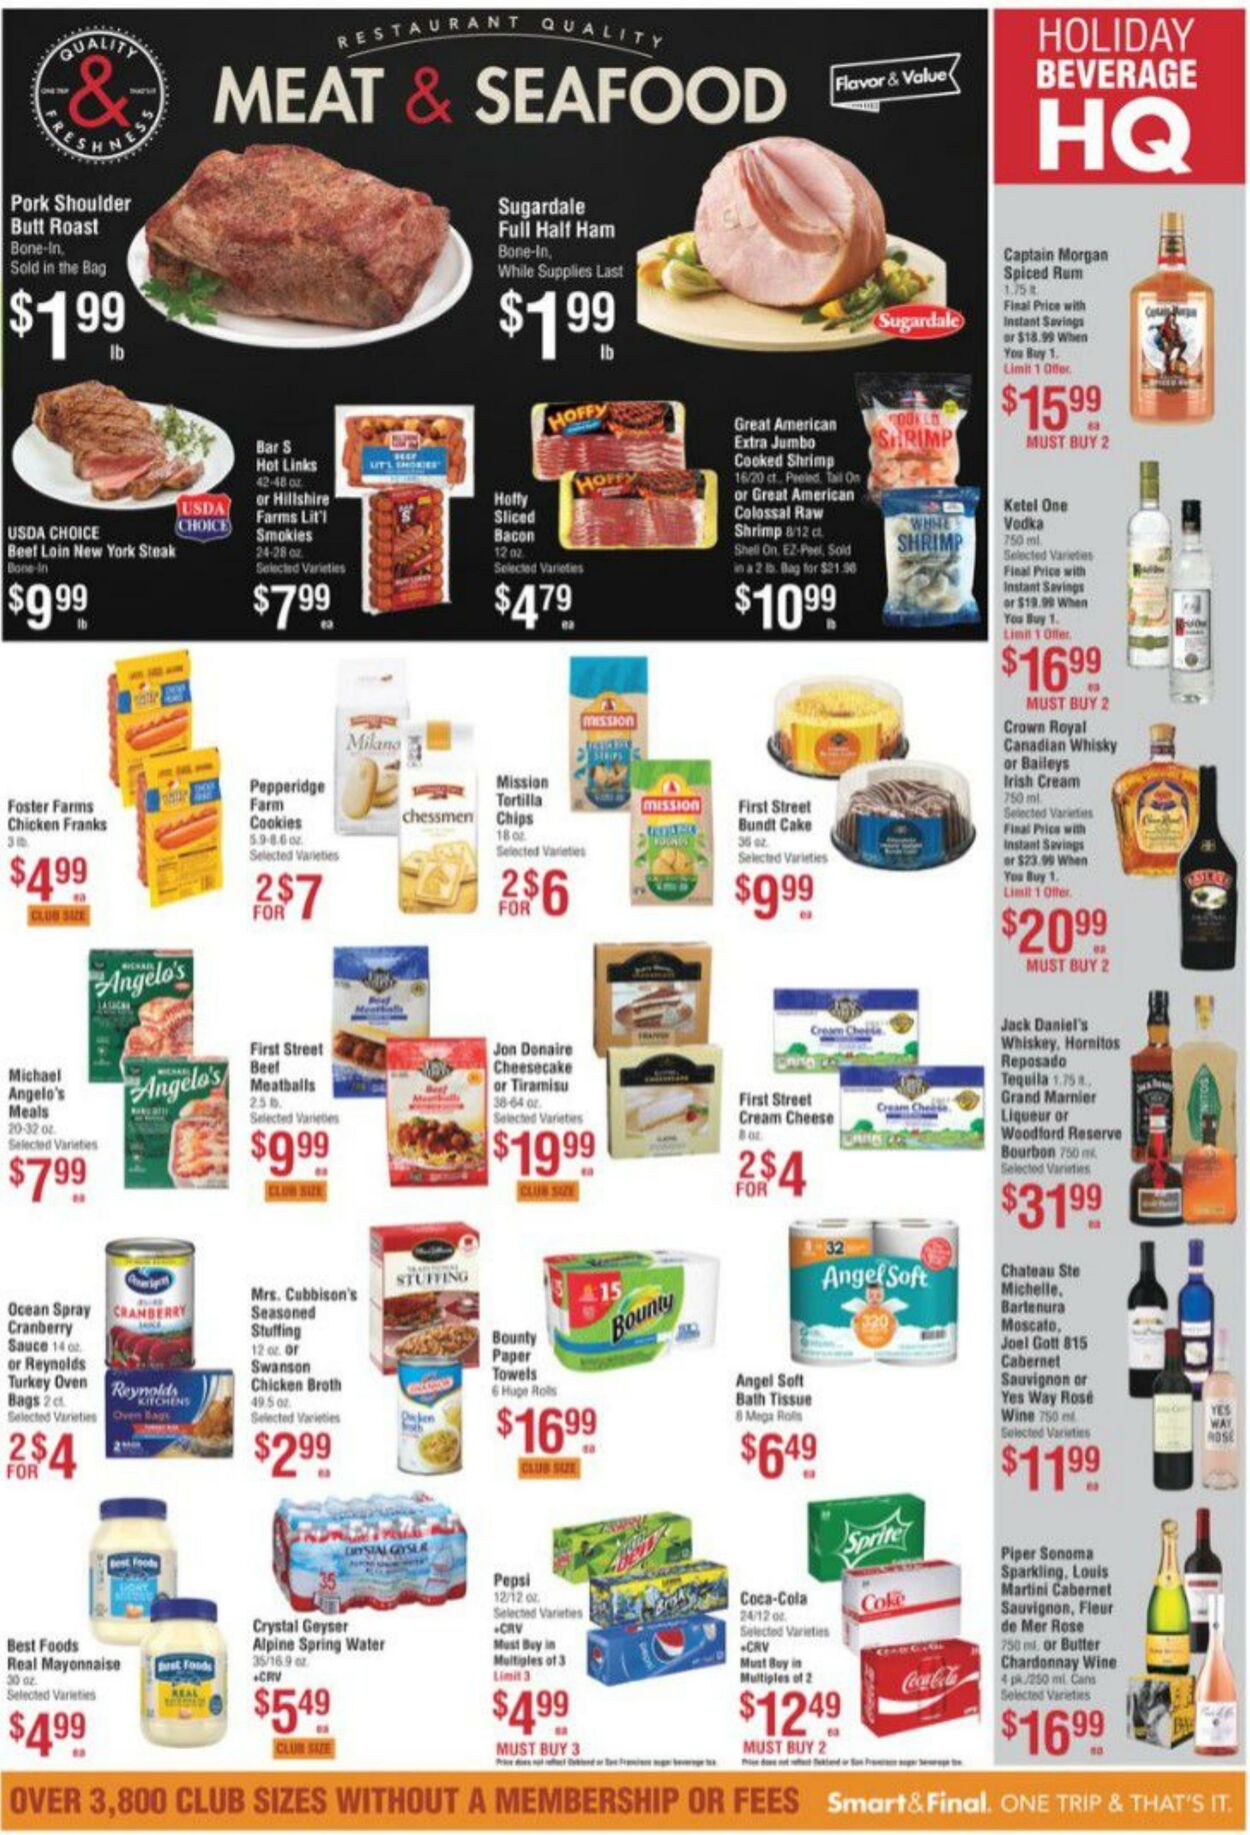 Weekly ad Smart and Final 12/14/2022 - 12/20/2022